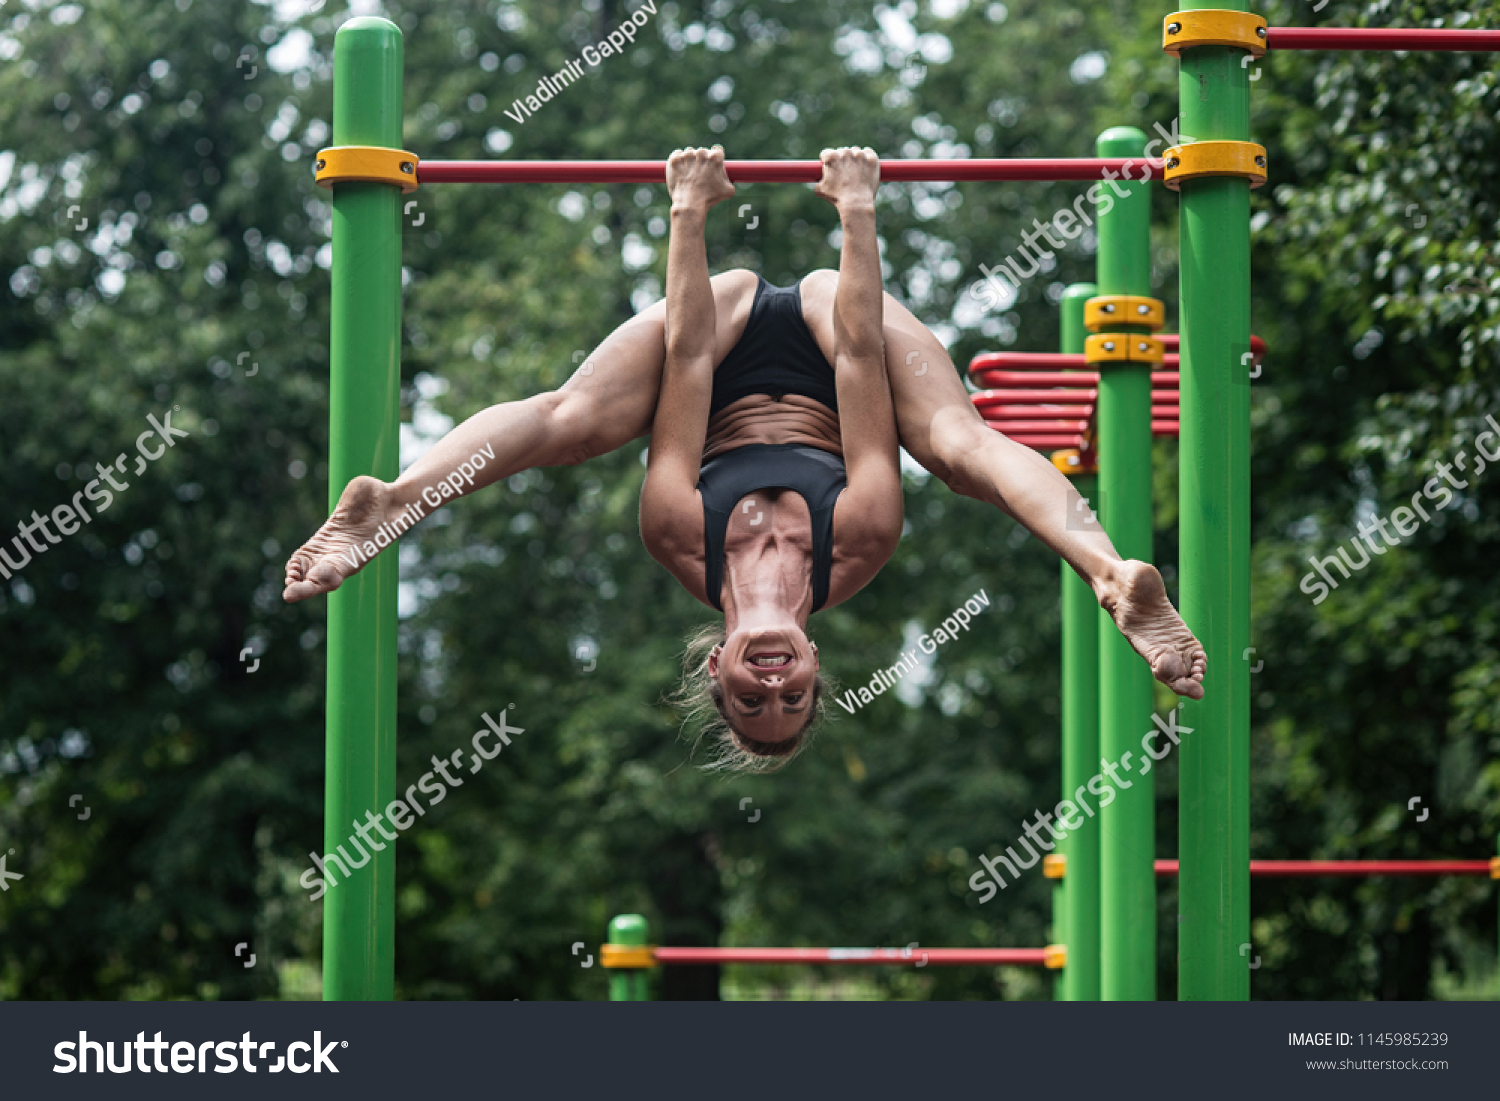 https://image.shutterstock.com/z/stock-photo-girl-doing-exercises-on-the-horizontal-bar-in-the-open-air-the-woman-is-engaged-in-workout-1145985239.jpg